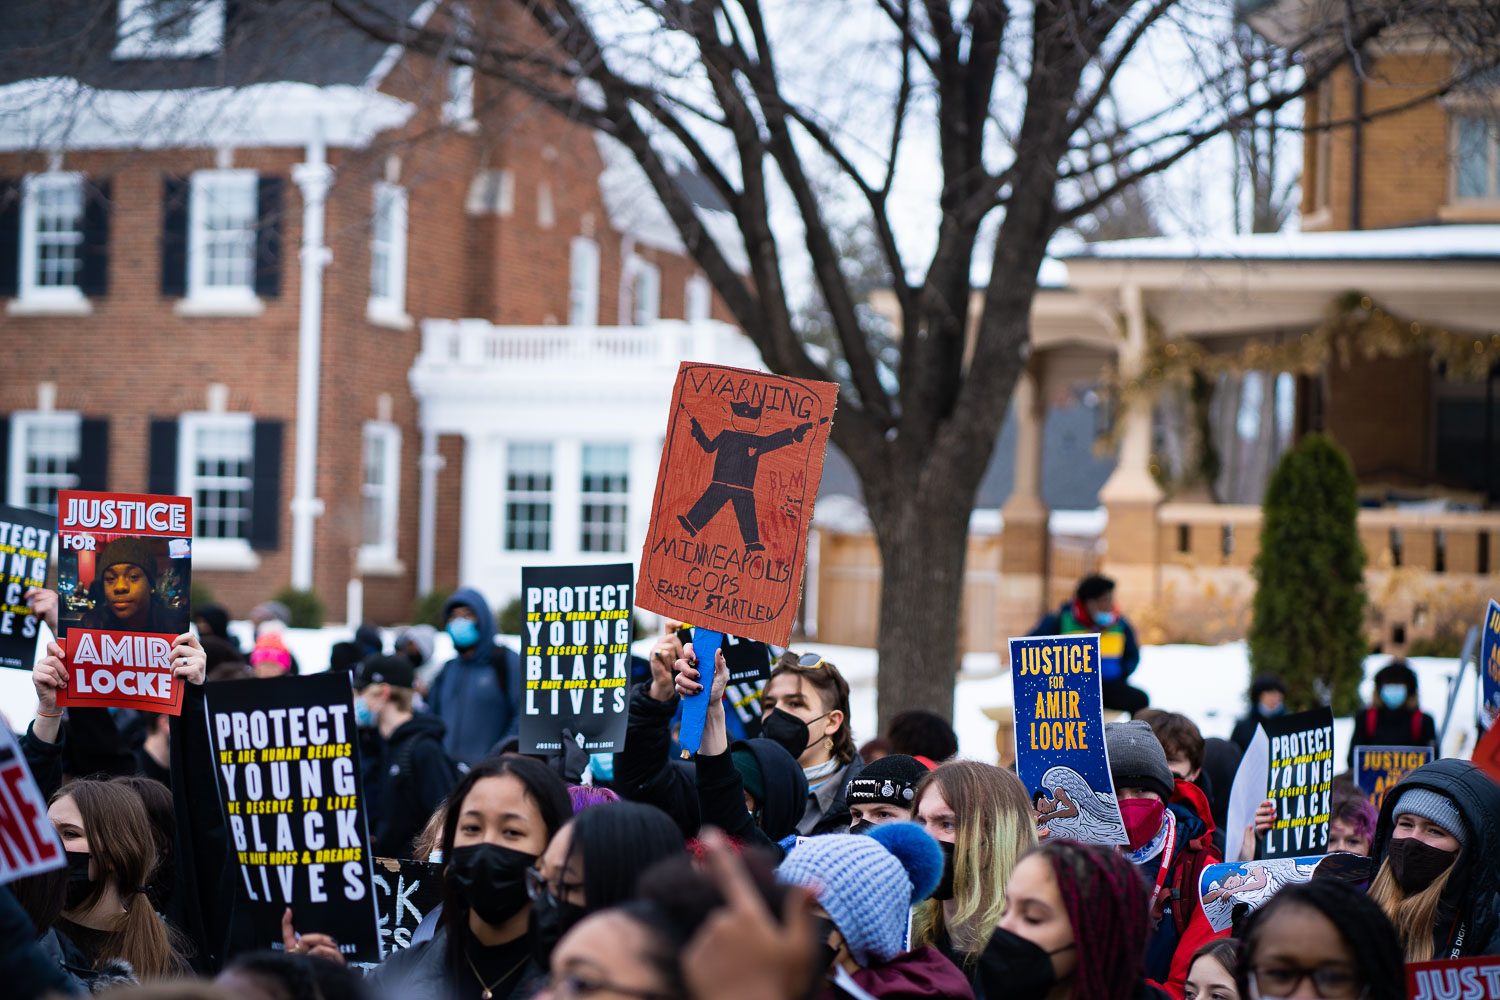 February 8, 2022 - St. Paul, Minn. -- High school students from aroudn the area march to the Minnesota Governor's Mansion demanding justice for Amir Locke.